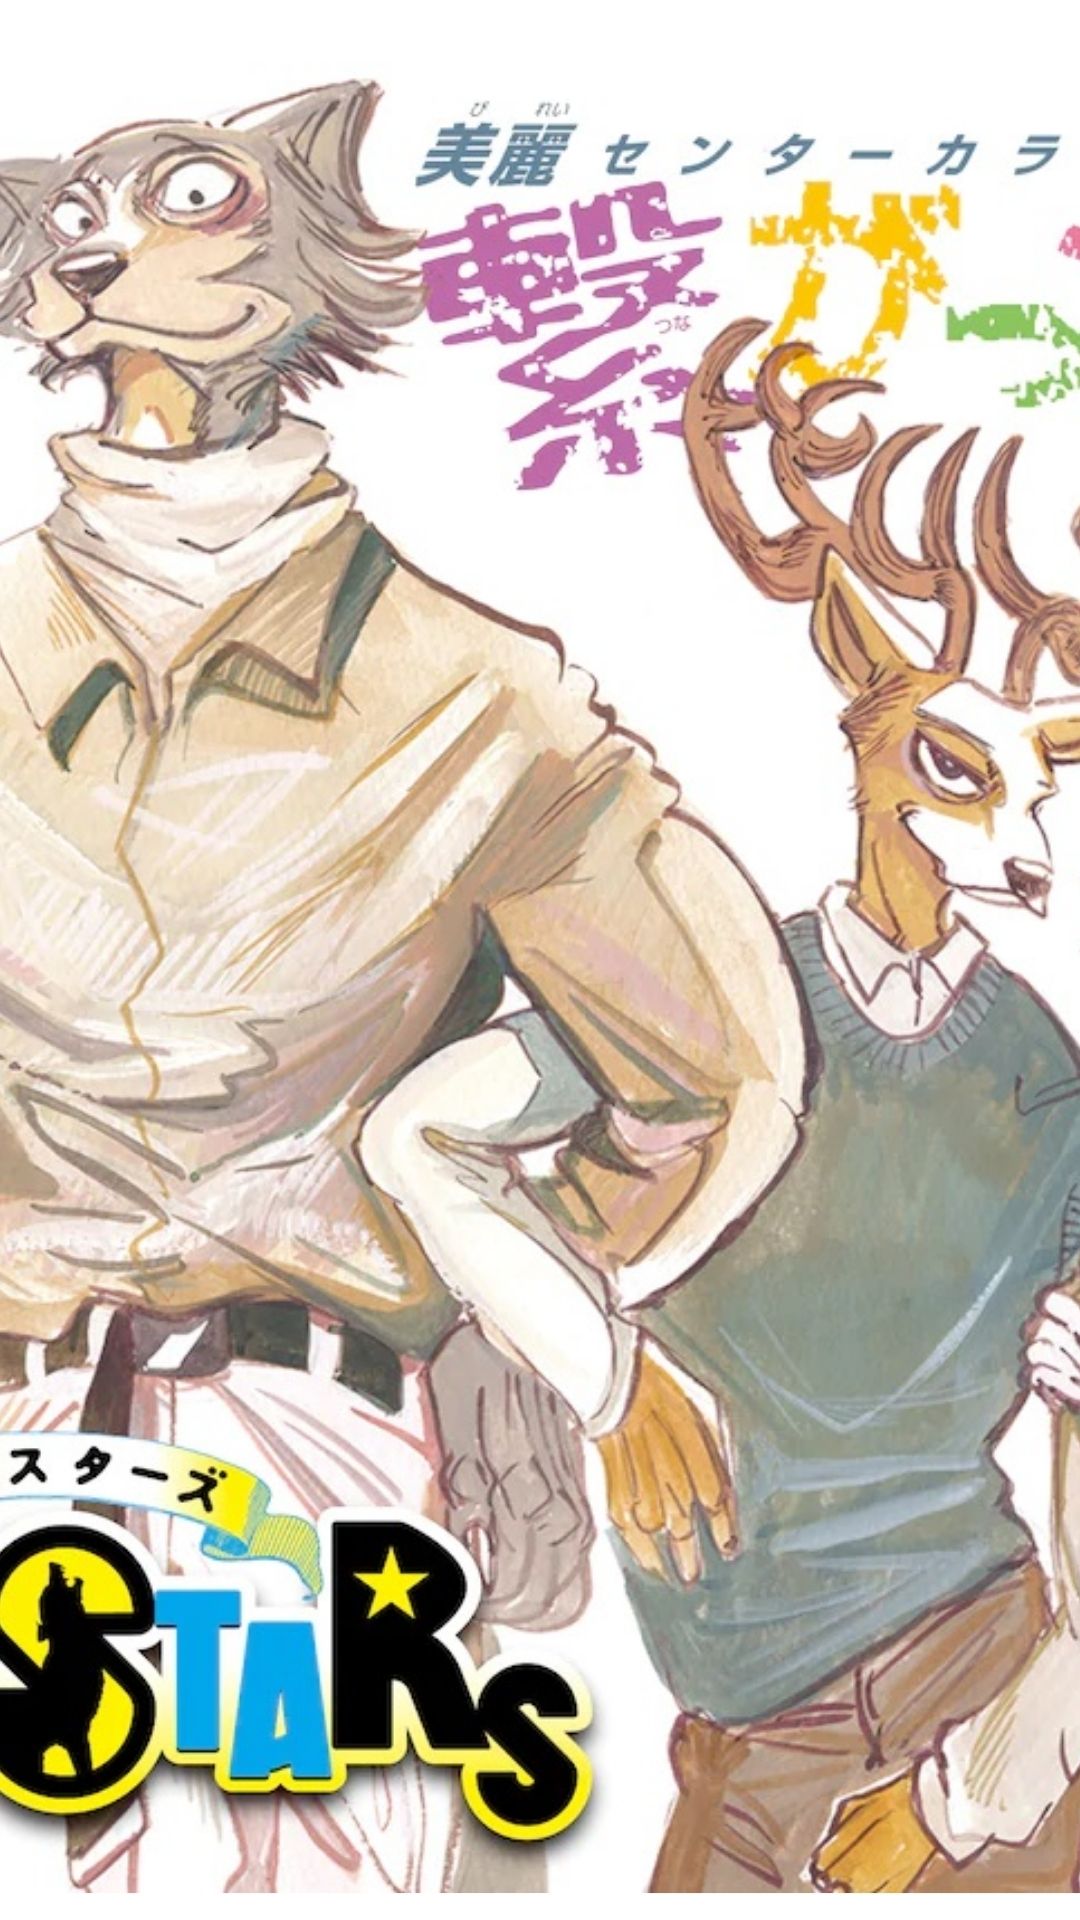 Beastars Manga to End with Chapter 197 on October 8